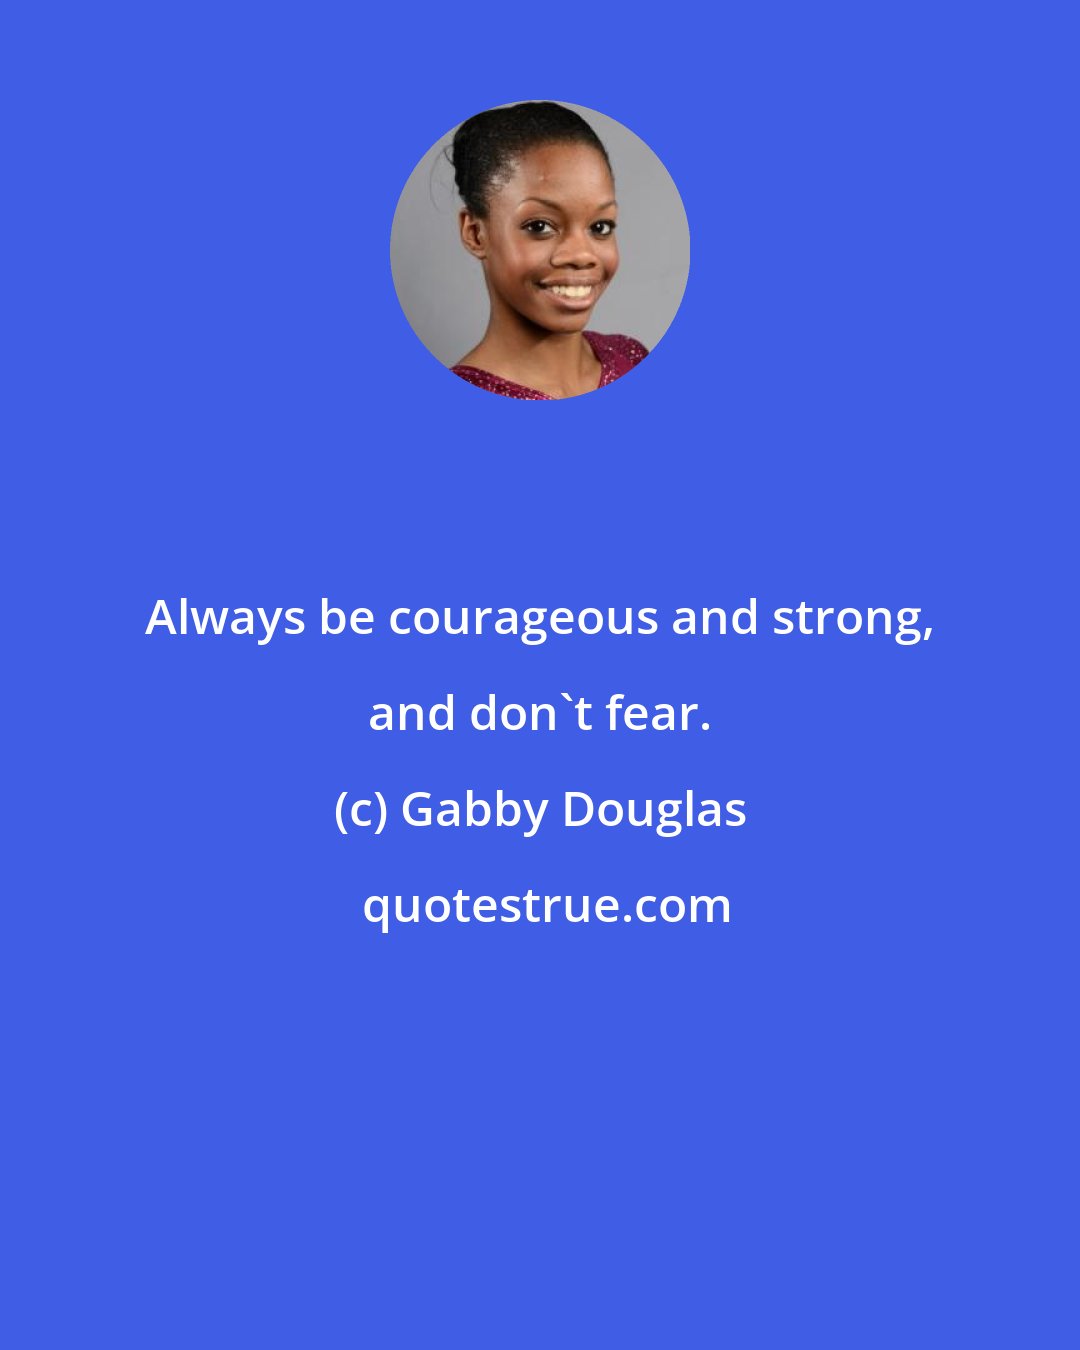 Gabby Douglas: Always be courageous and strong, and don't fear.